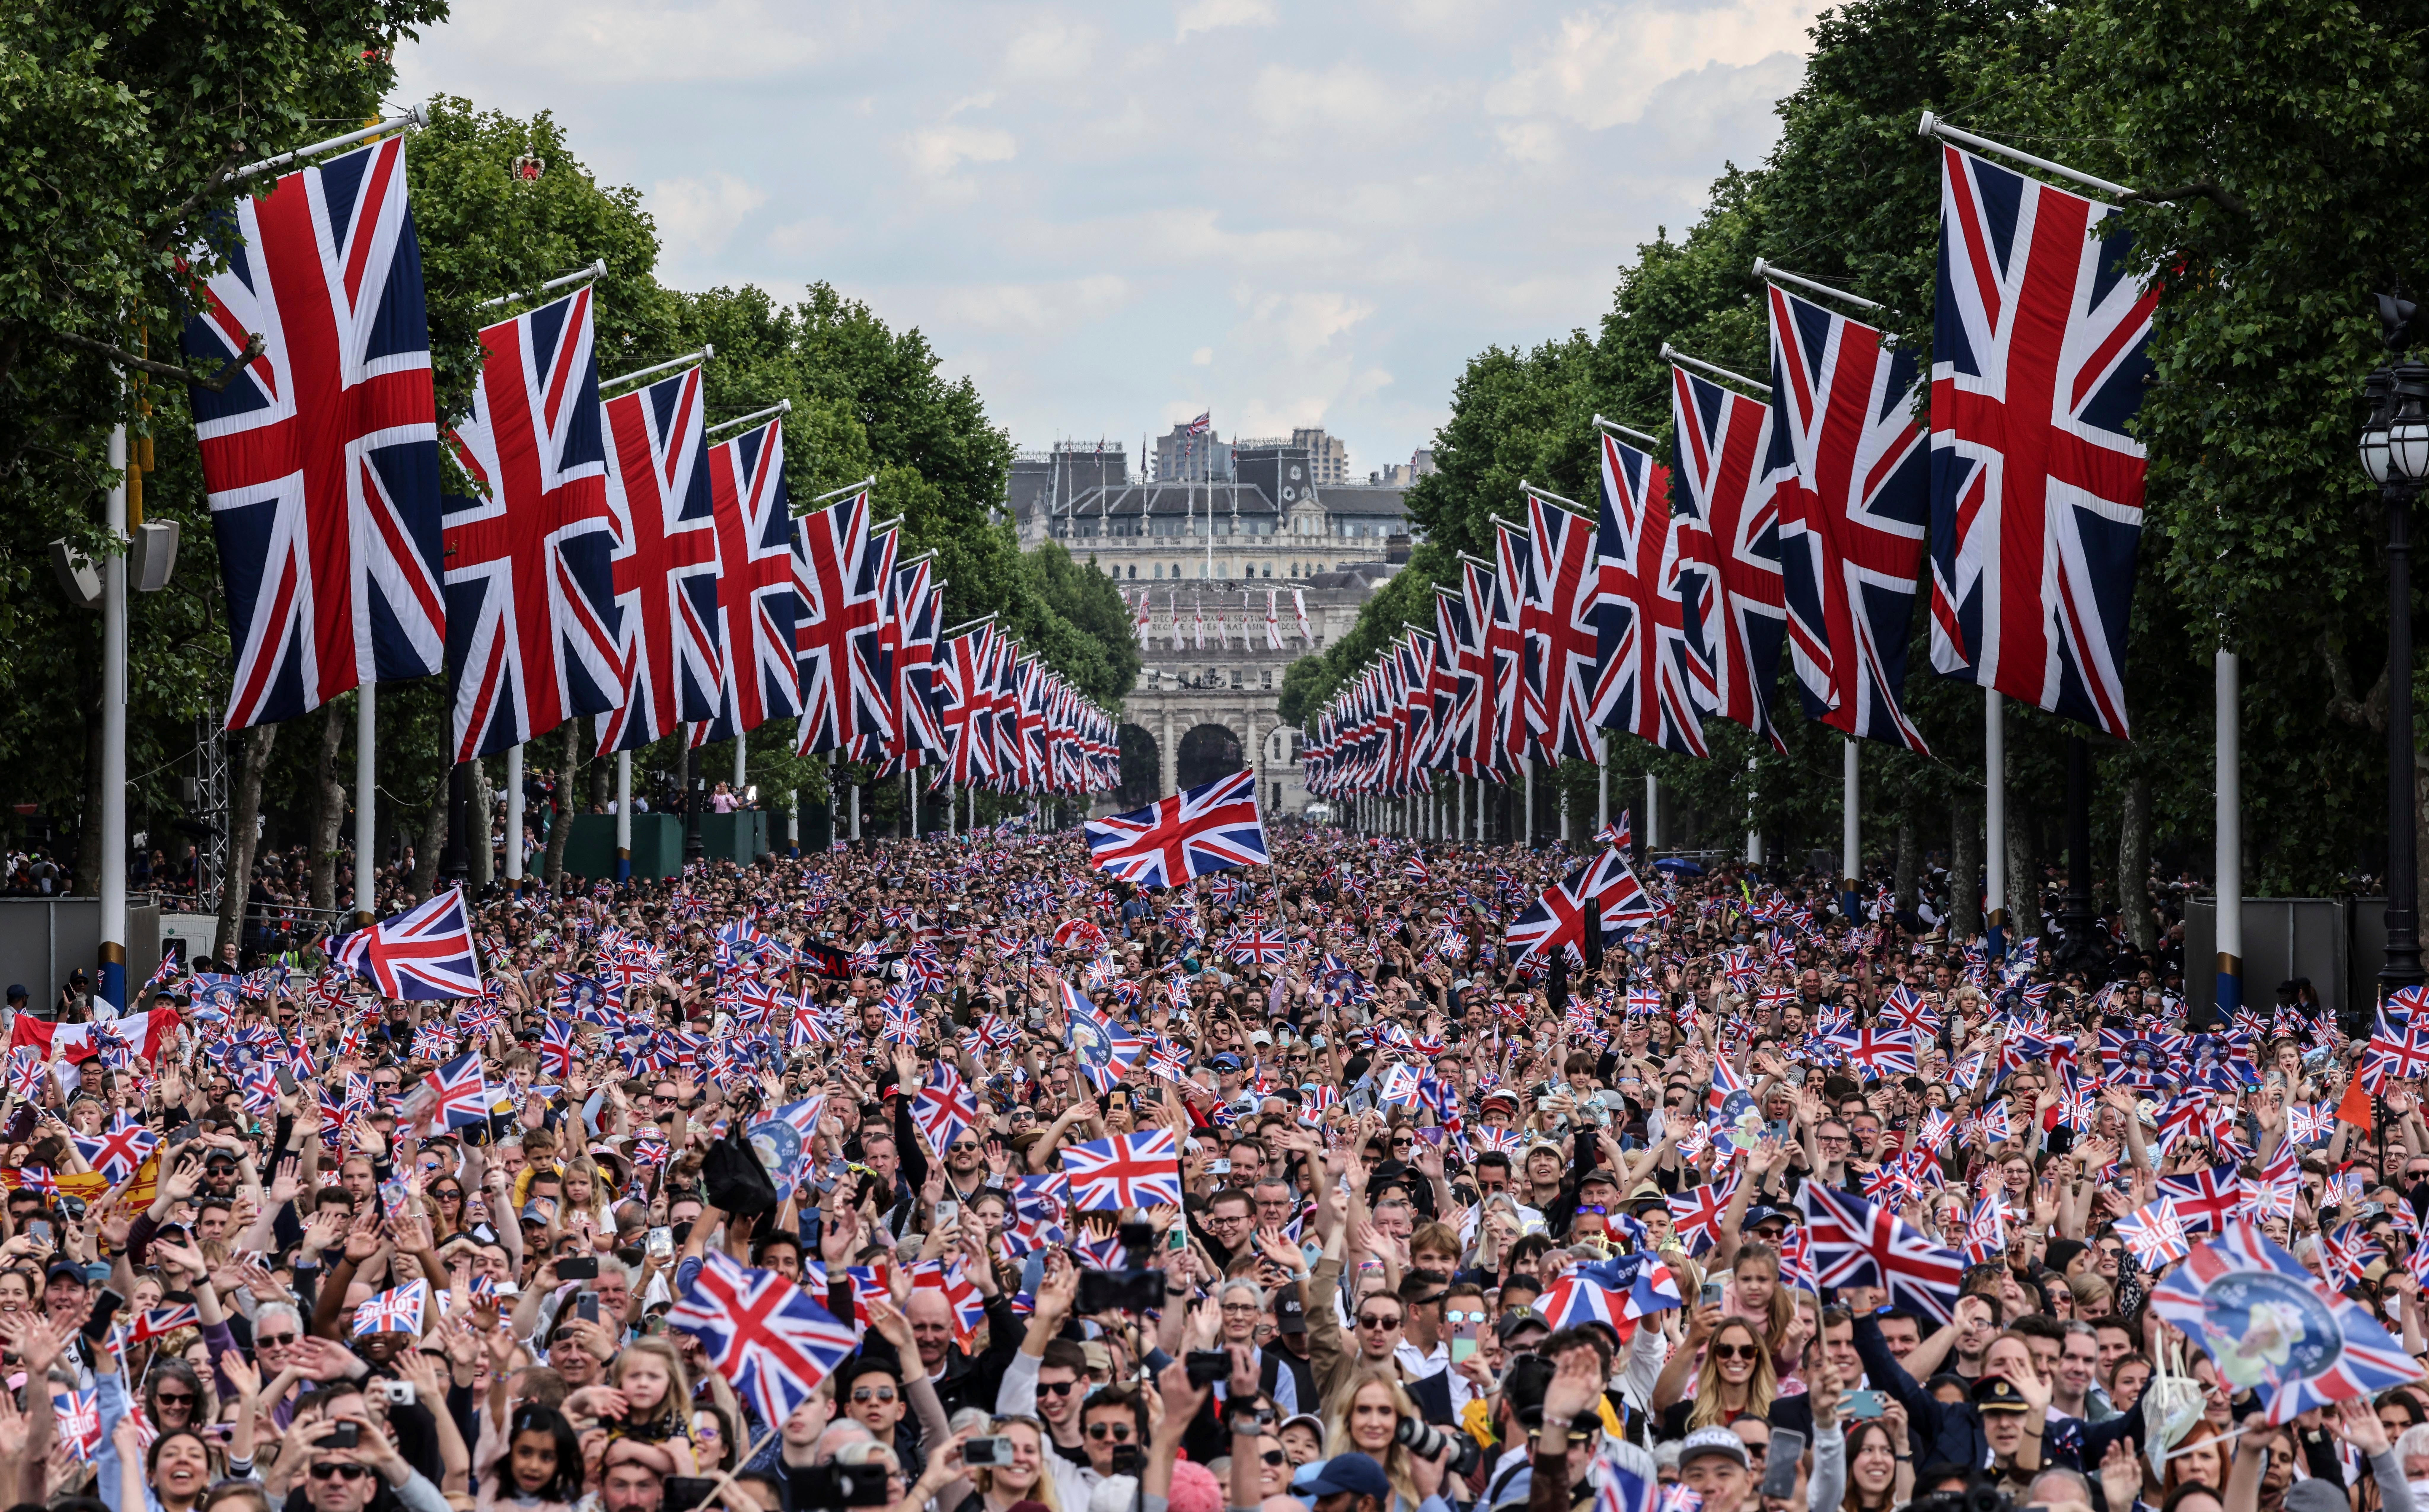 The crowd fill The Mall as they wait for the royal family to appear on the balcony of Buckingham Palace